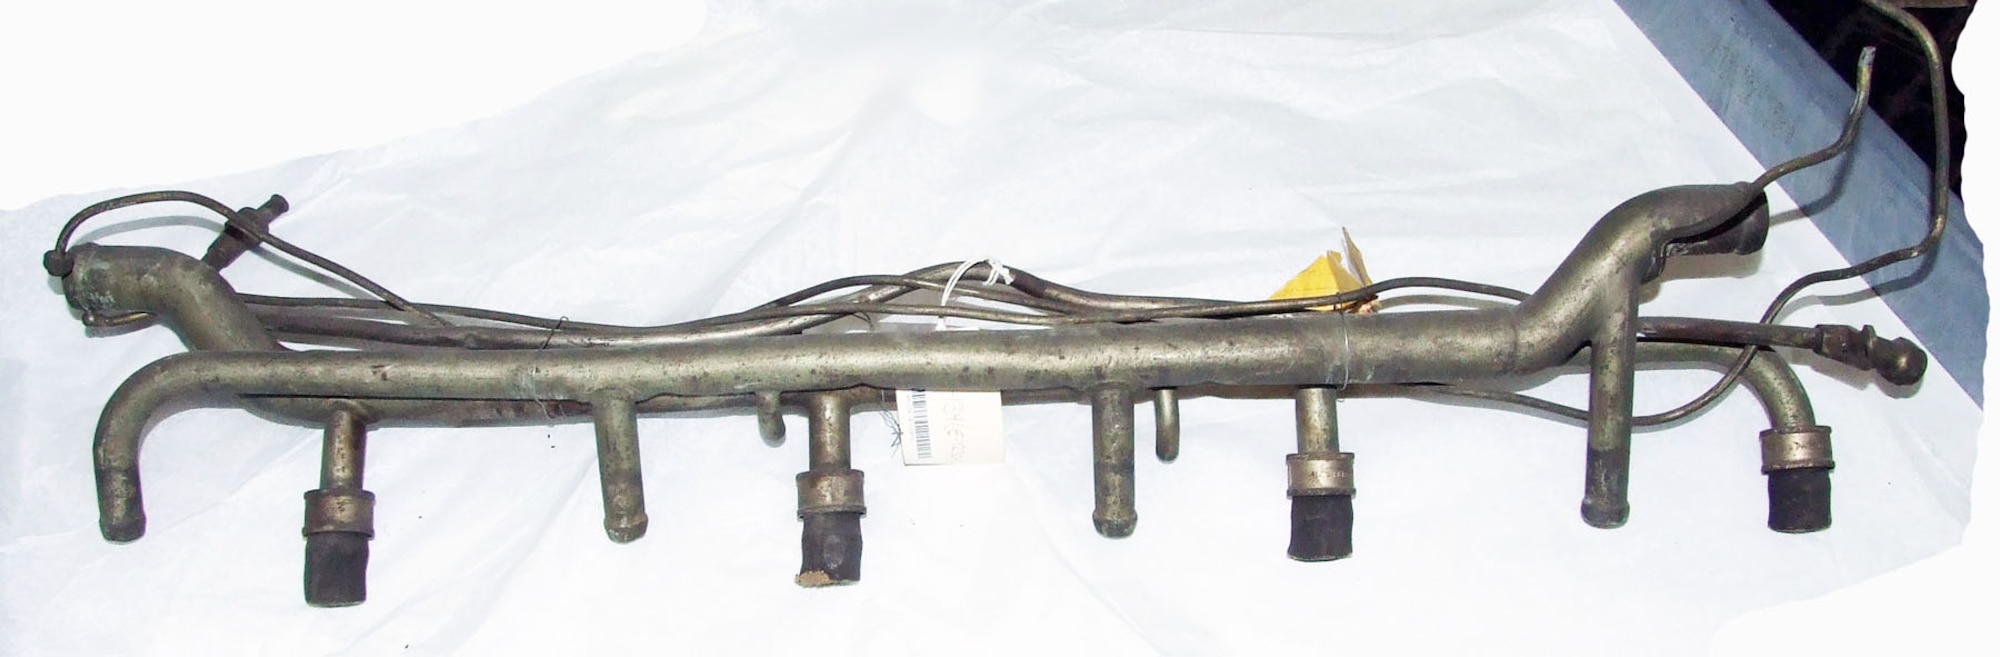 This type of water manifold was used on R-1, R-4 and R-5 U.S. Army Air Service racing aircraft during the 1920s. These Army aircraft competed for the Pulitzer Trophy. (U.S. Air Force photo)